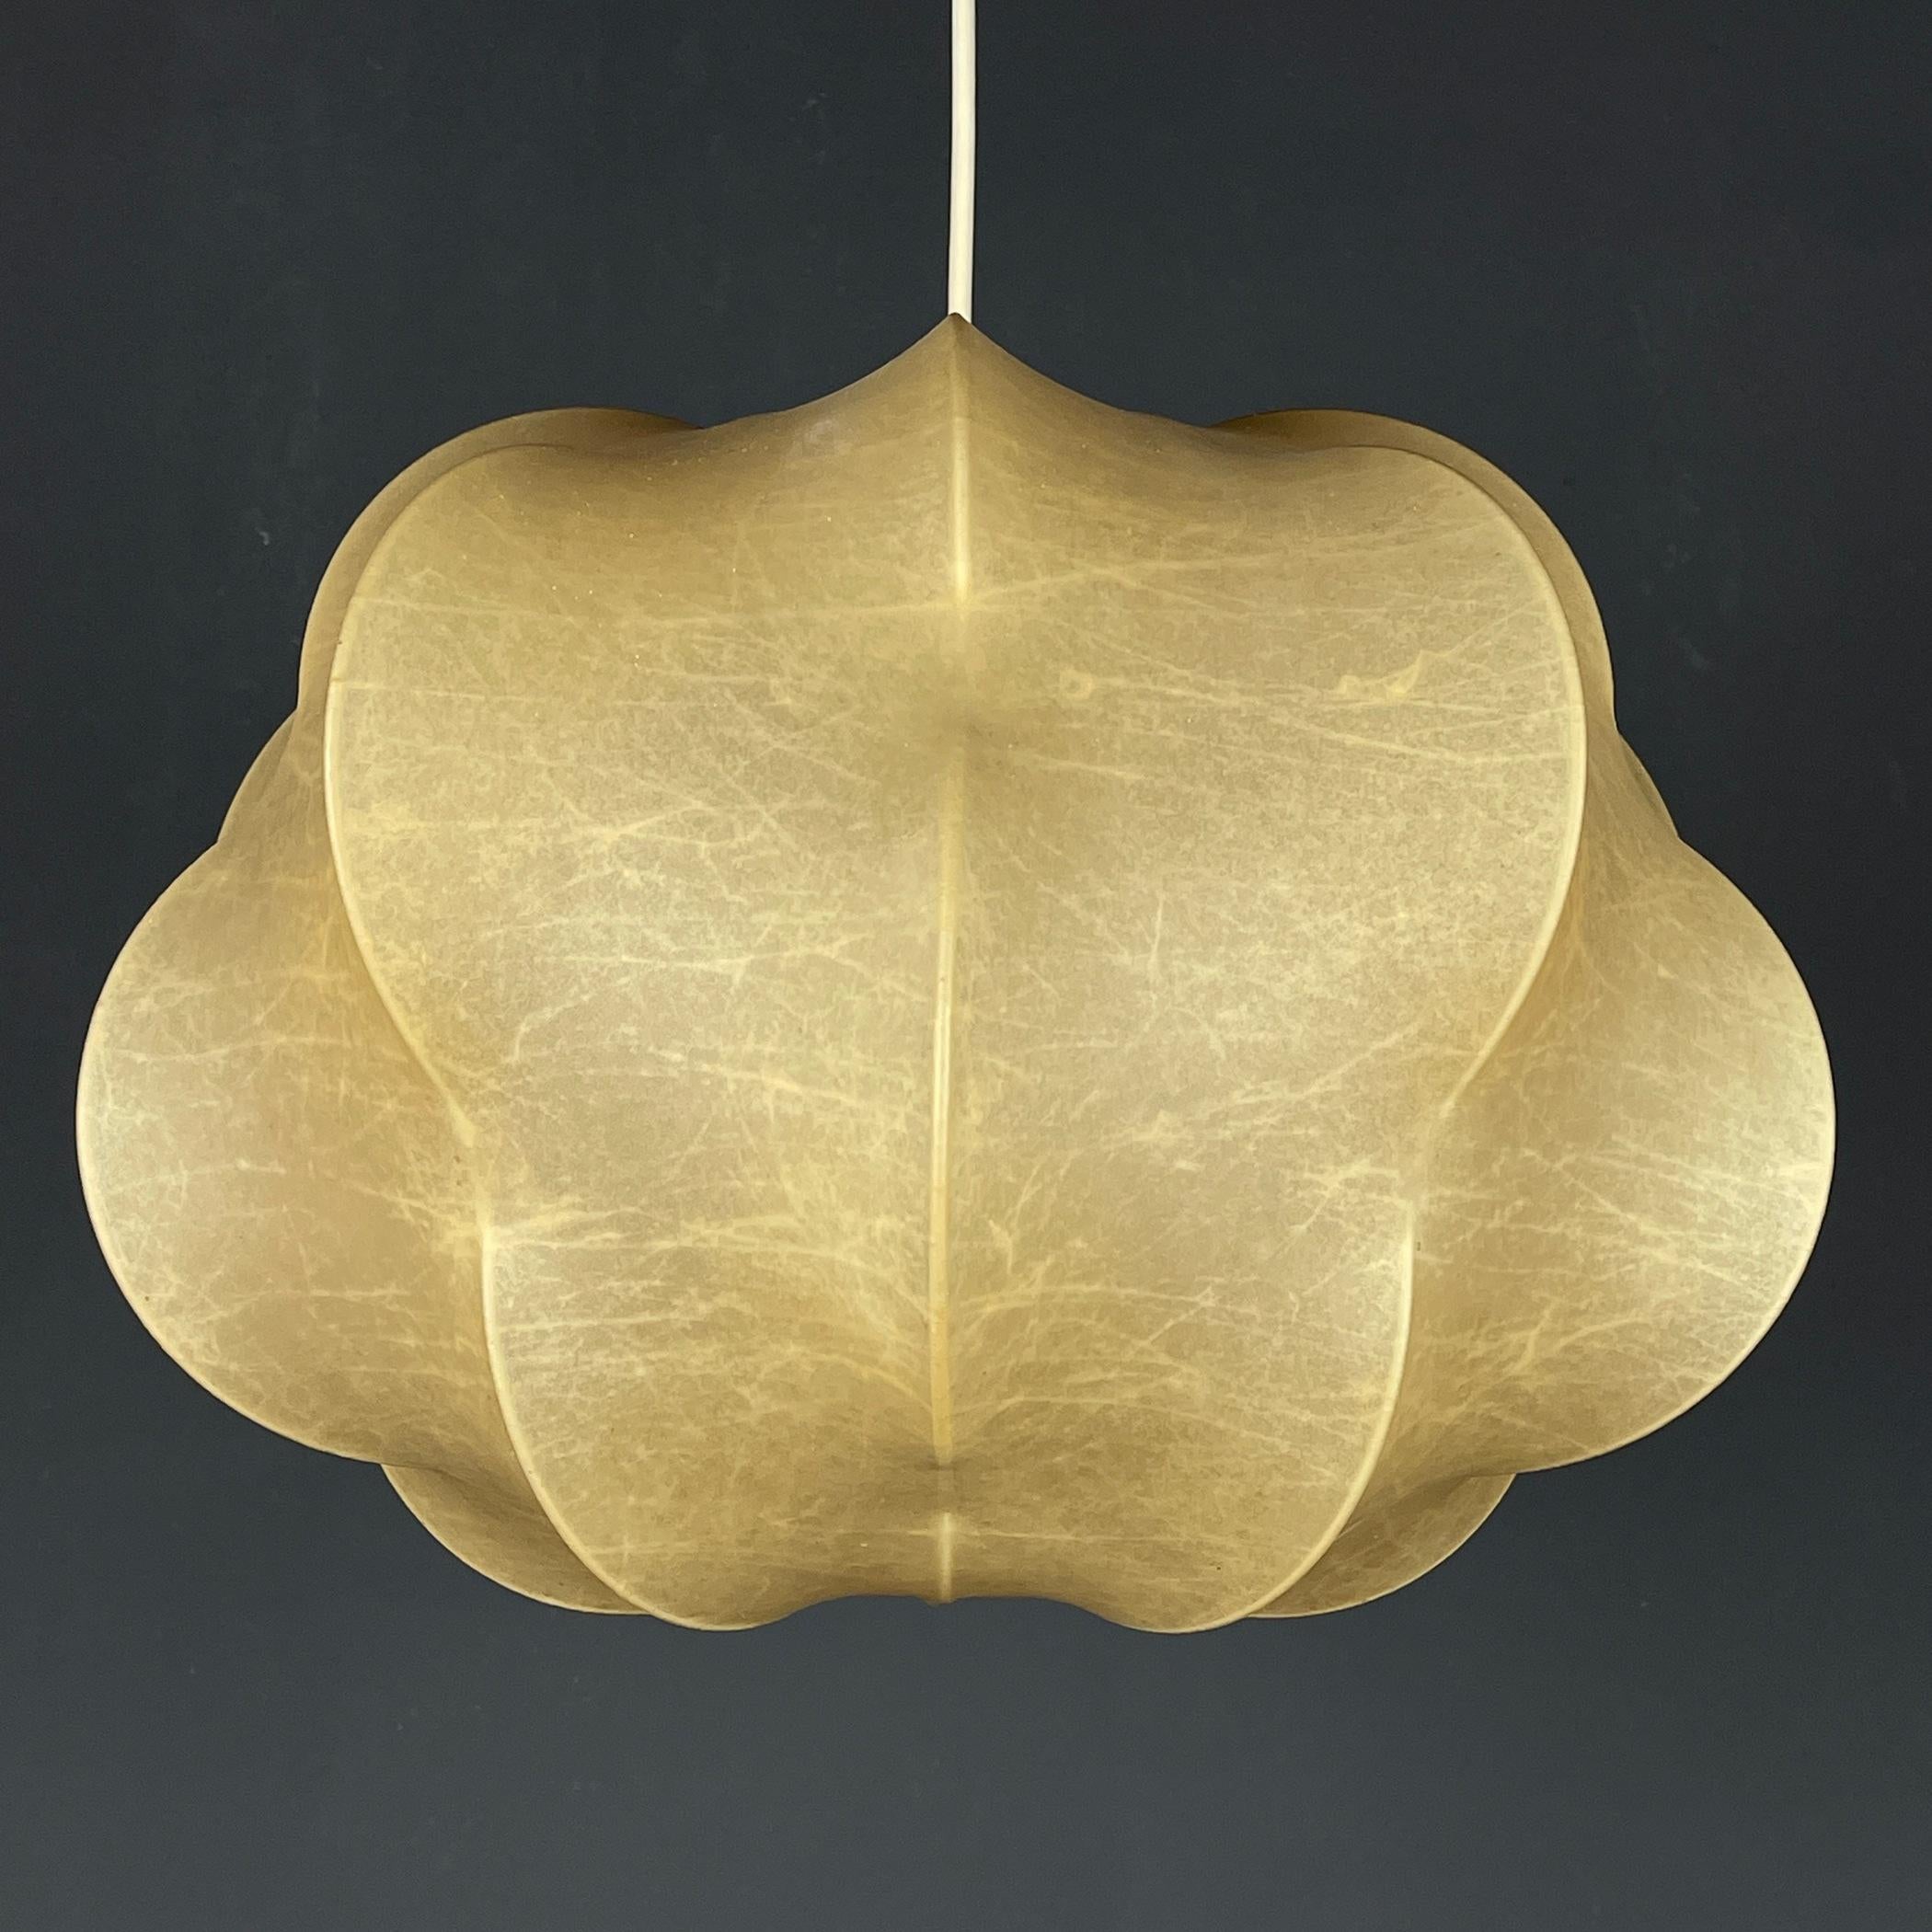 Italian Nuvola Cocoon Chandelier by Tobia Scarpa for Flos, Italy 1962 For Sale